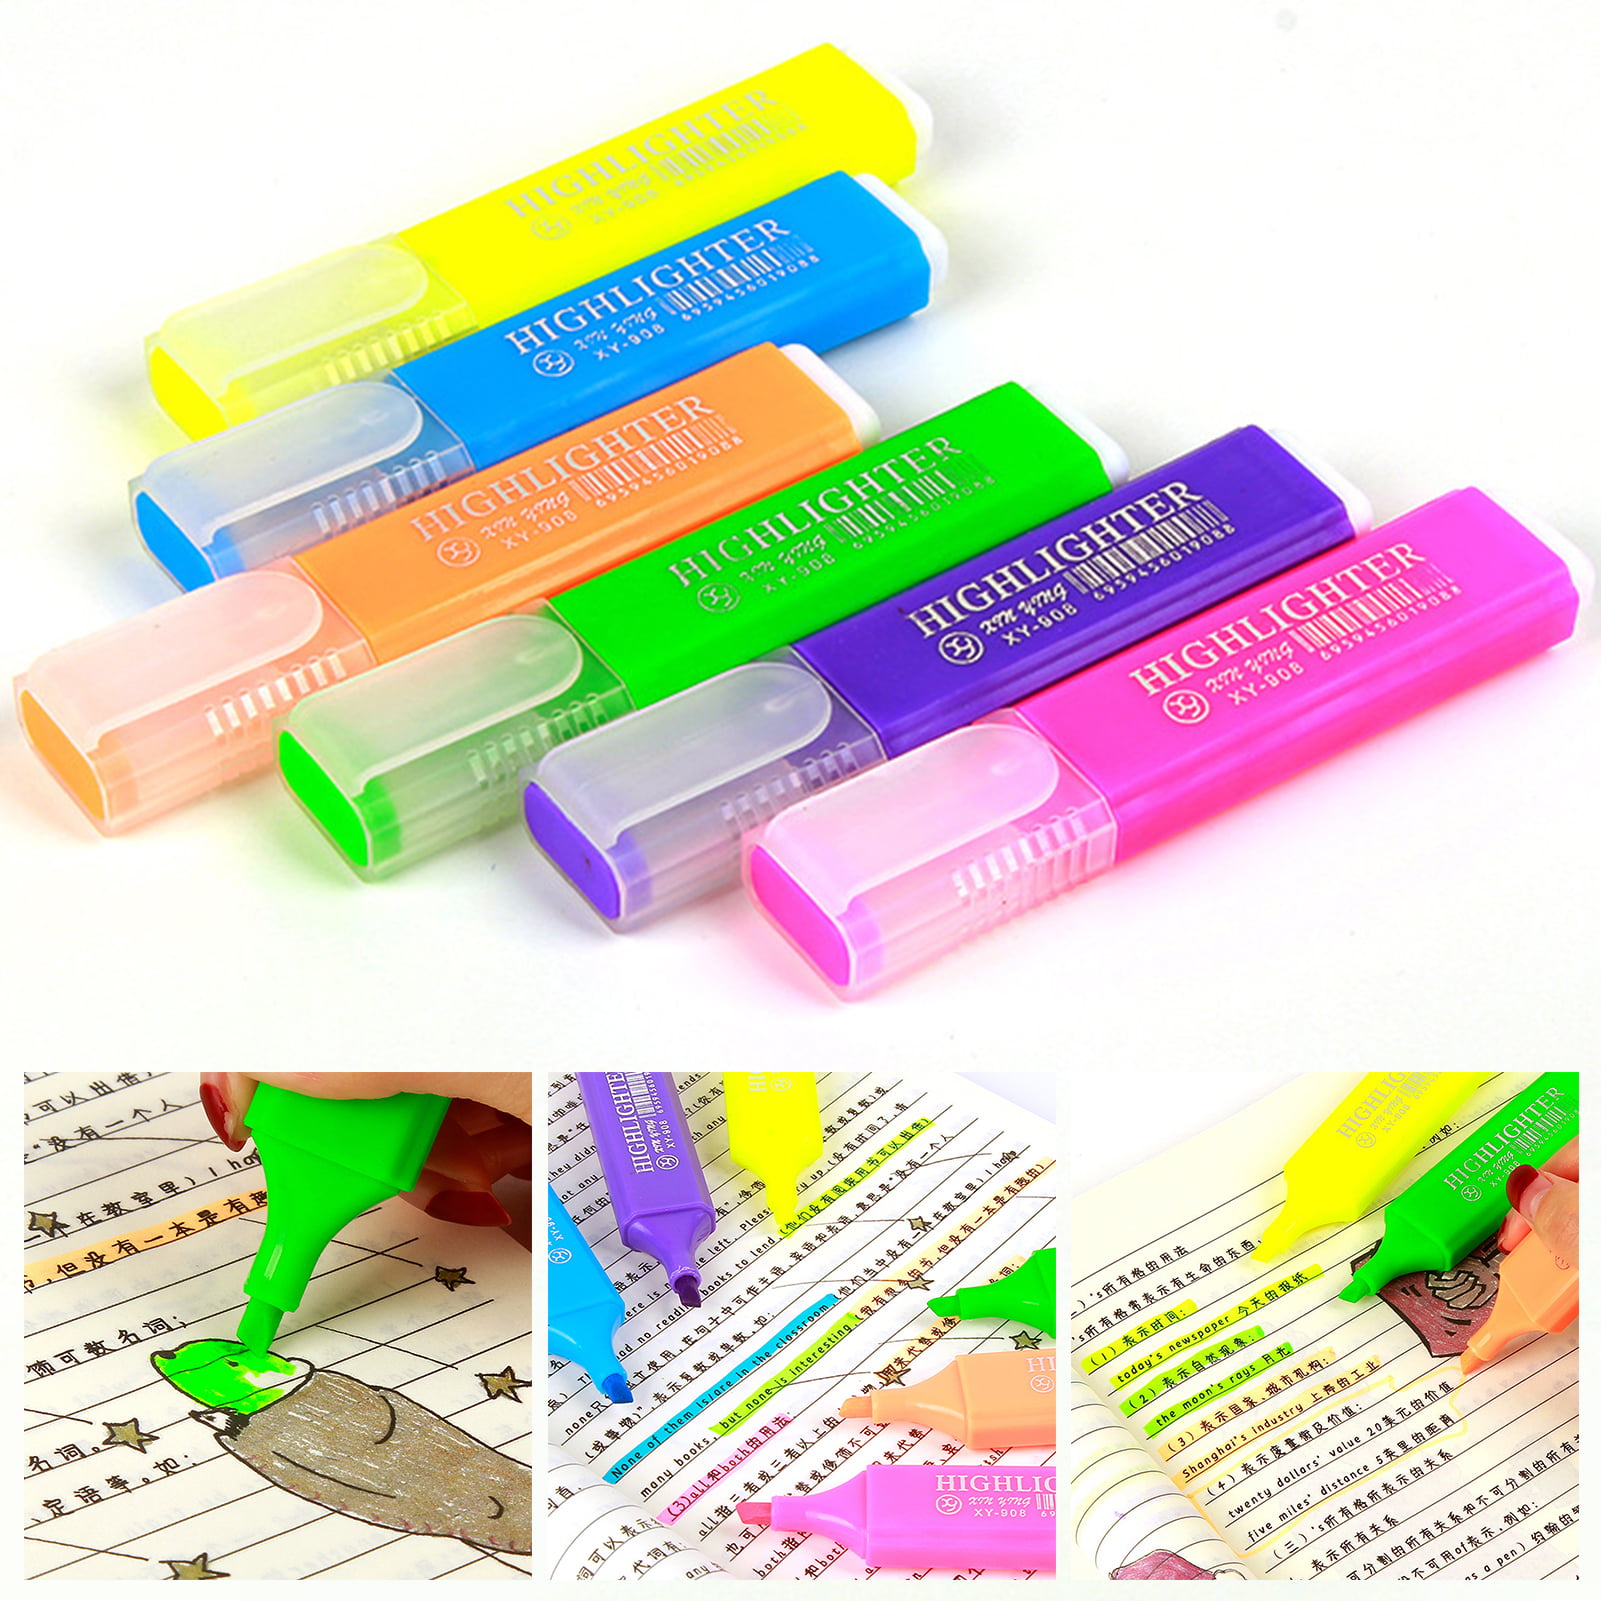 NiArt Glitter Highlighter Pens 16 Colors, Chisel Tip Sparkling Markers with  Durable & Fade-Resistant Pastel Shades, Non-Toxic Pigment Quick-Dry Ink